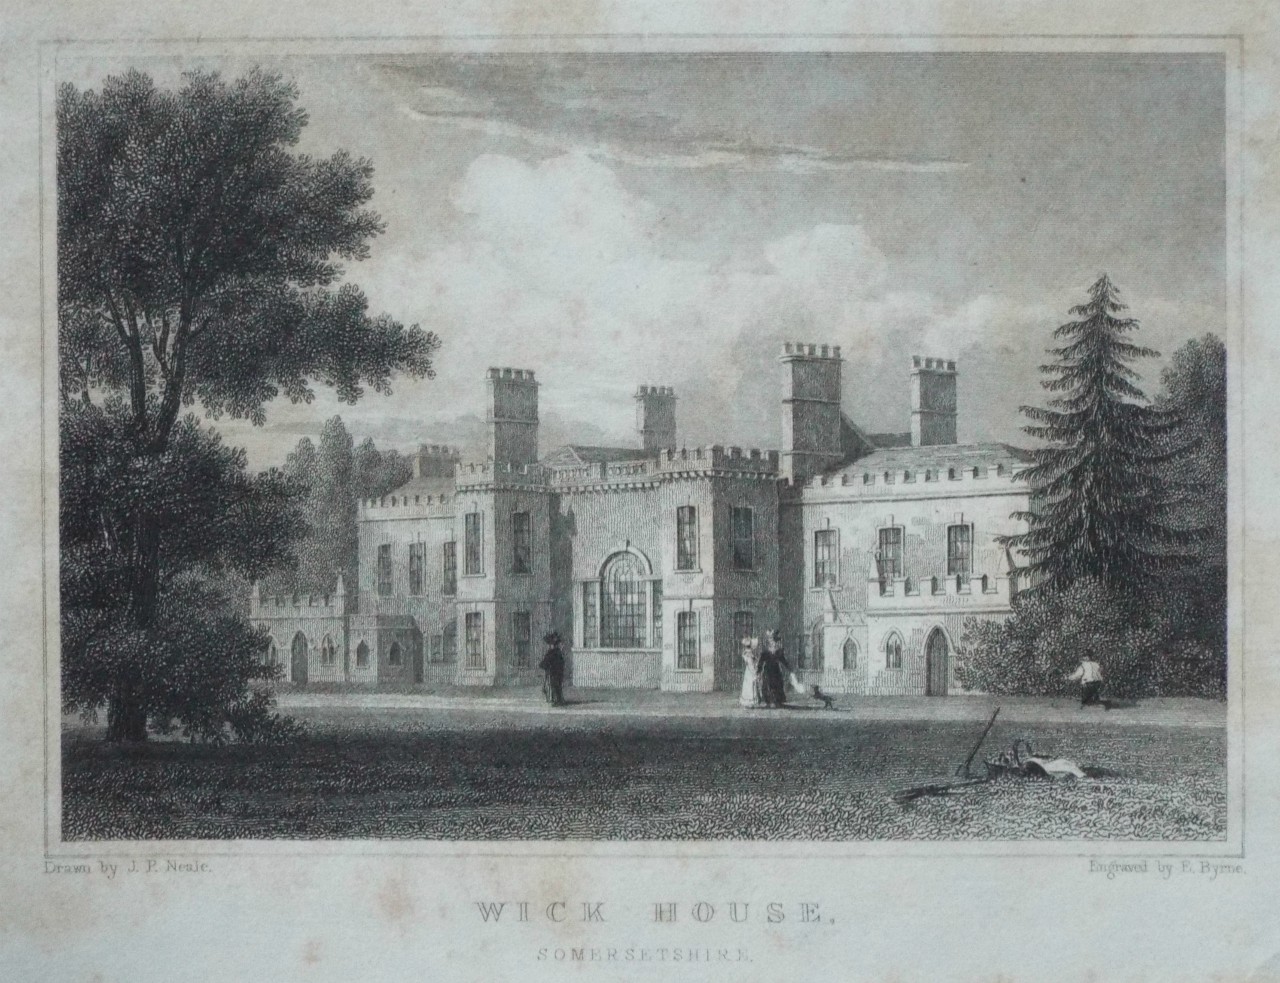 Print - Wick House, Somersetshire. - Byrne